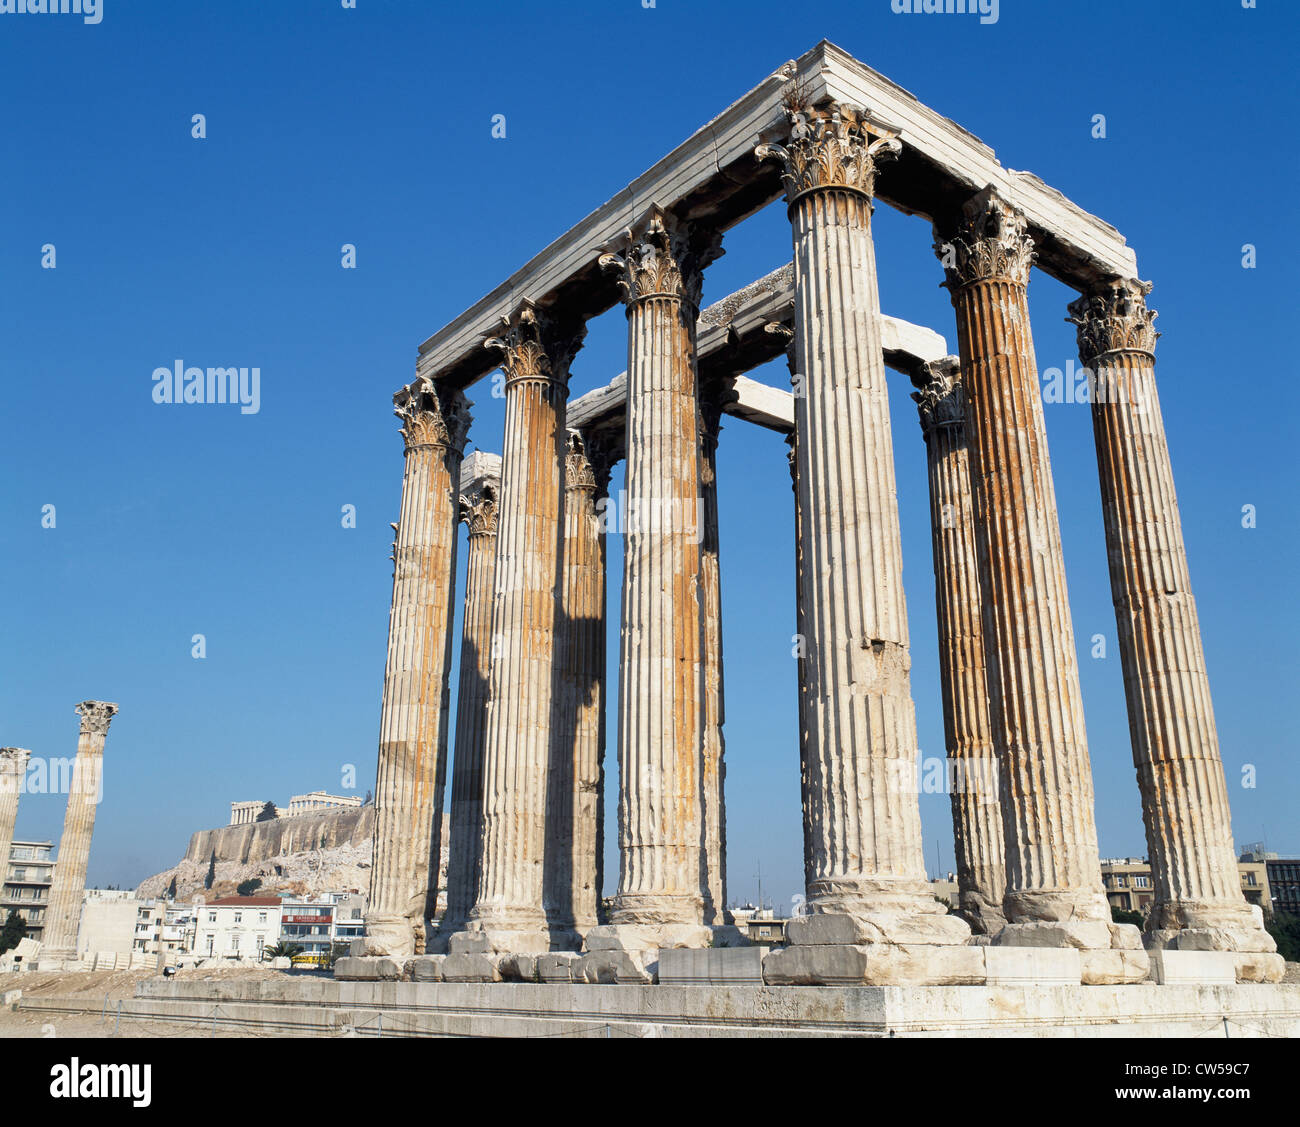 Low angle view of the old ruins of a temple, Temple of Olympian Zeus, Athens, Greece Stock Photo